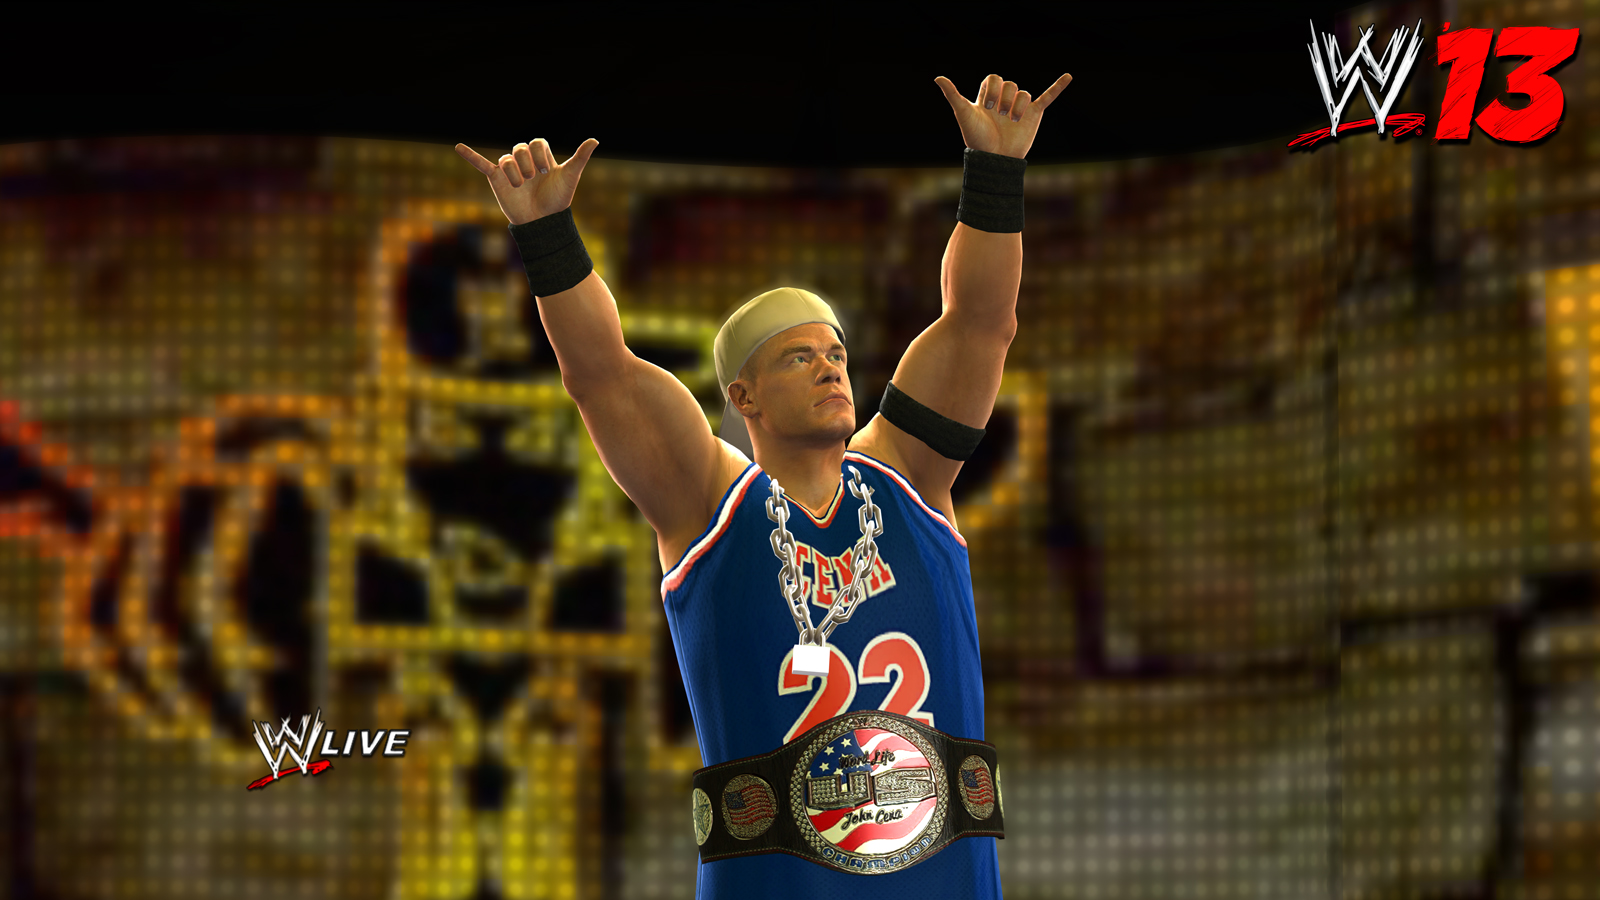 THQ Announces WWE ’13 DLC Packages for Xbox LIVE & Playstation Network – Trailer & Screenshots